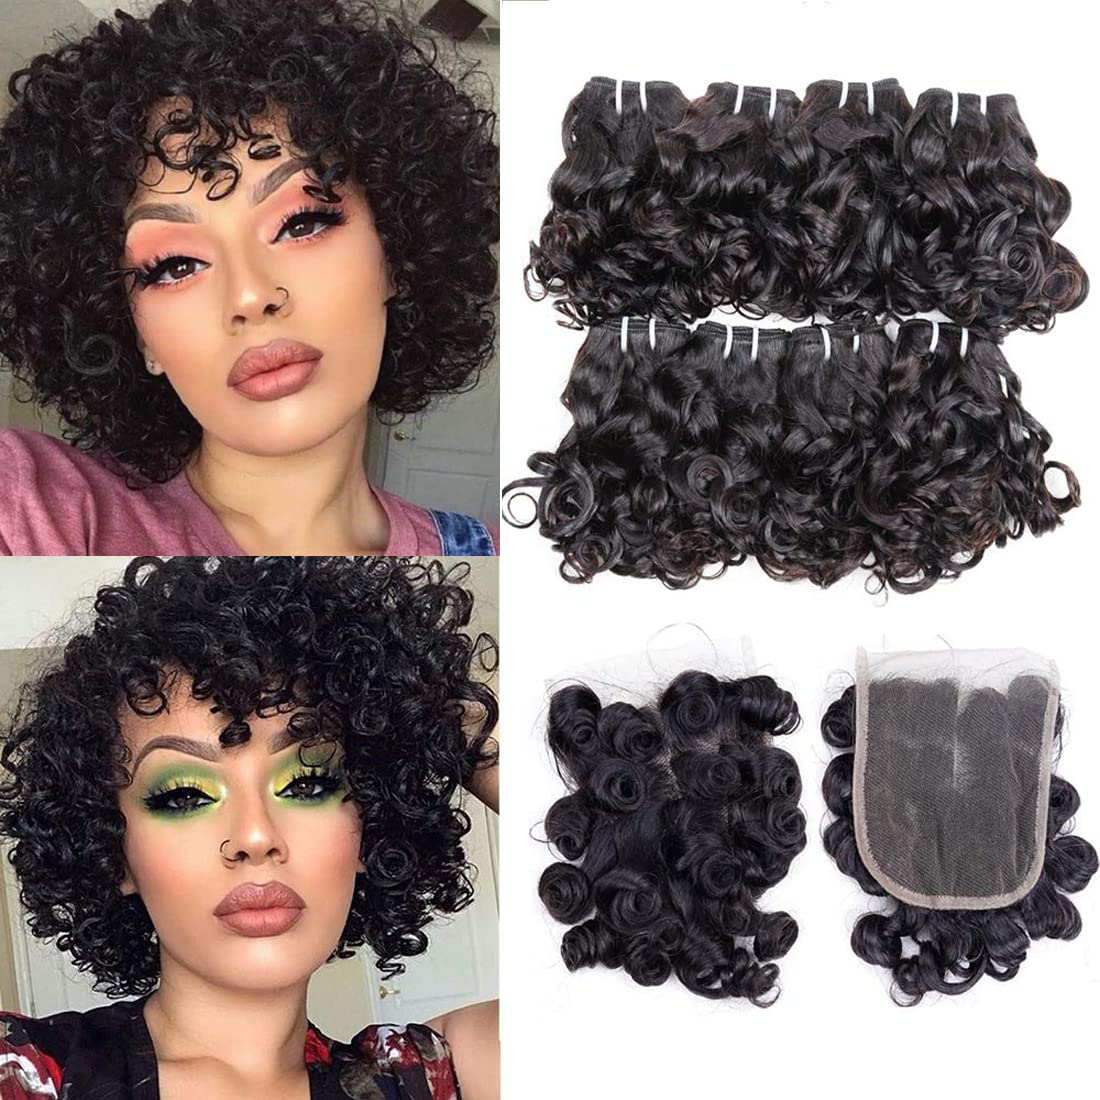 Sew-in Weave with Malaysian Curly Hair